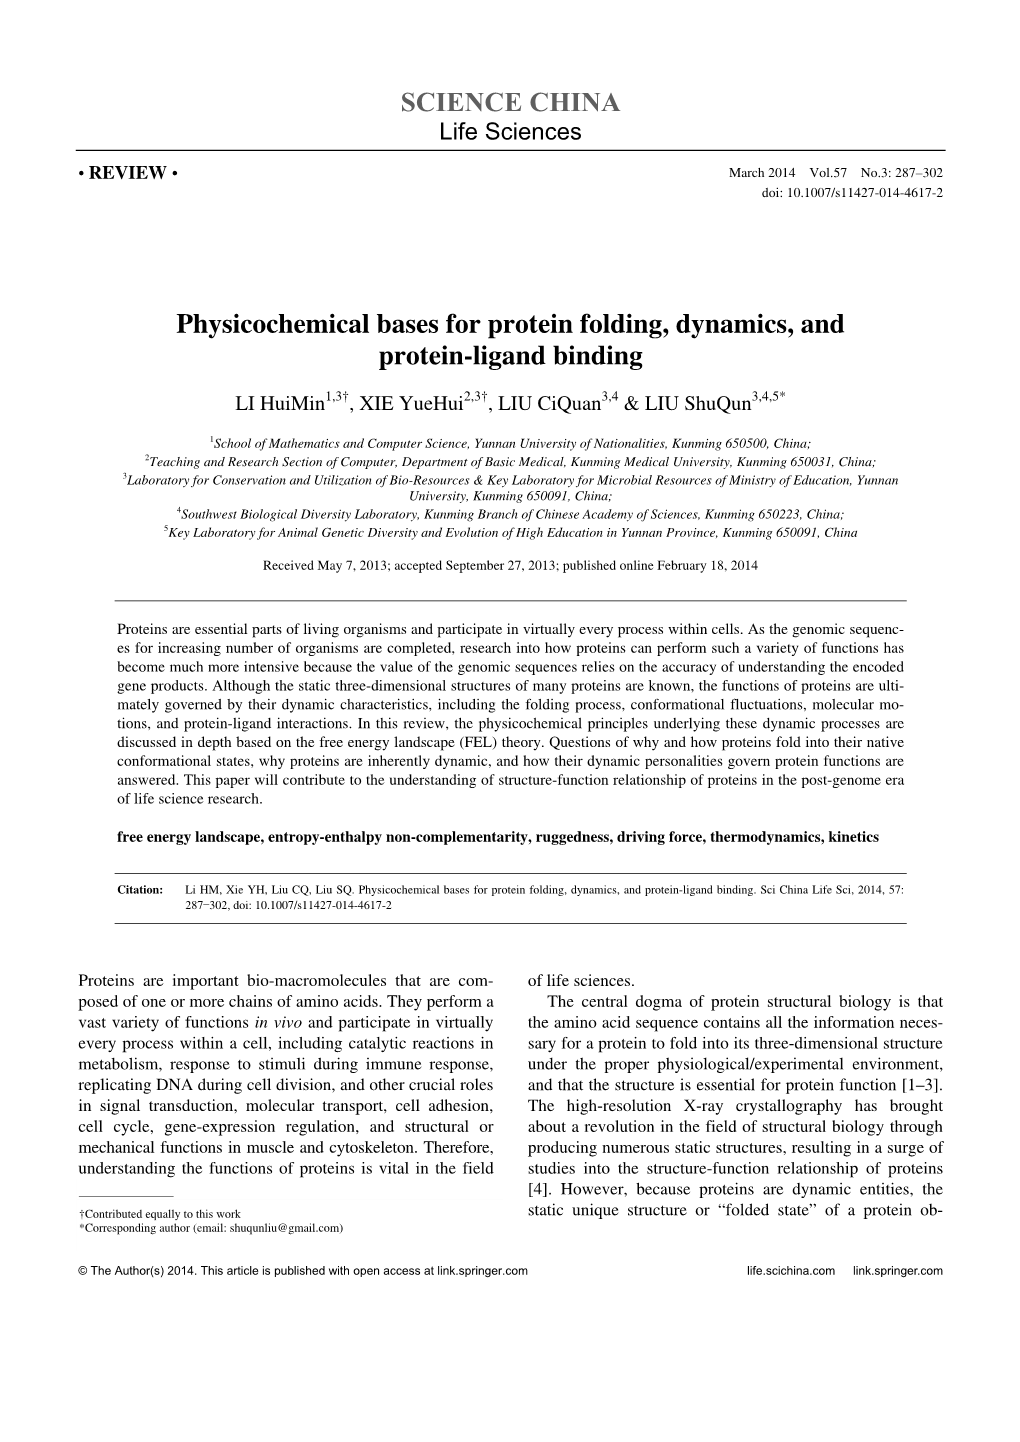 SCIENCE CHINA Physicochemical Bases for Protein Folding, Dynamics, and Protein-Ligand Binding